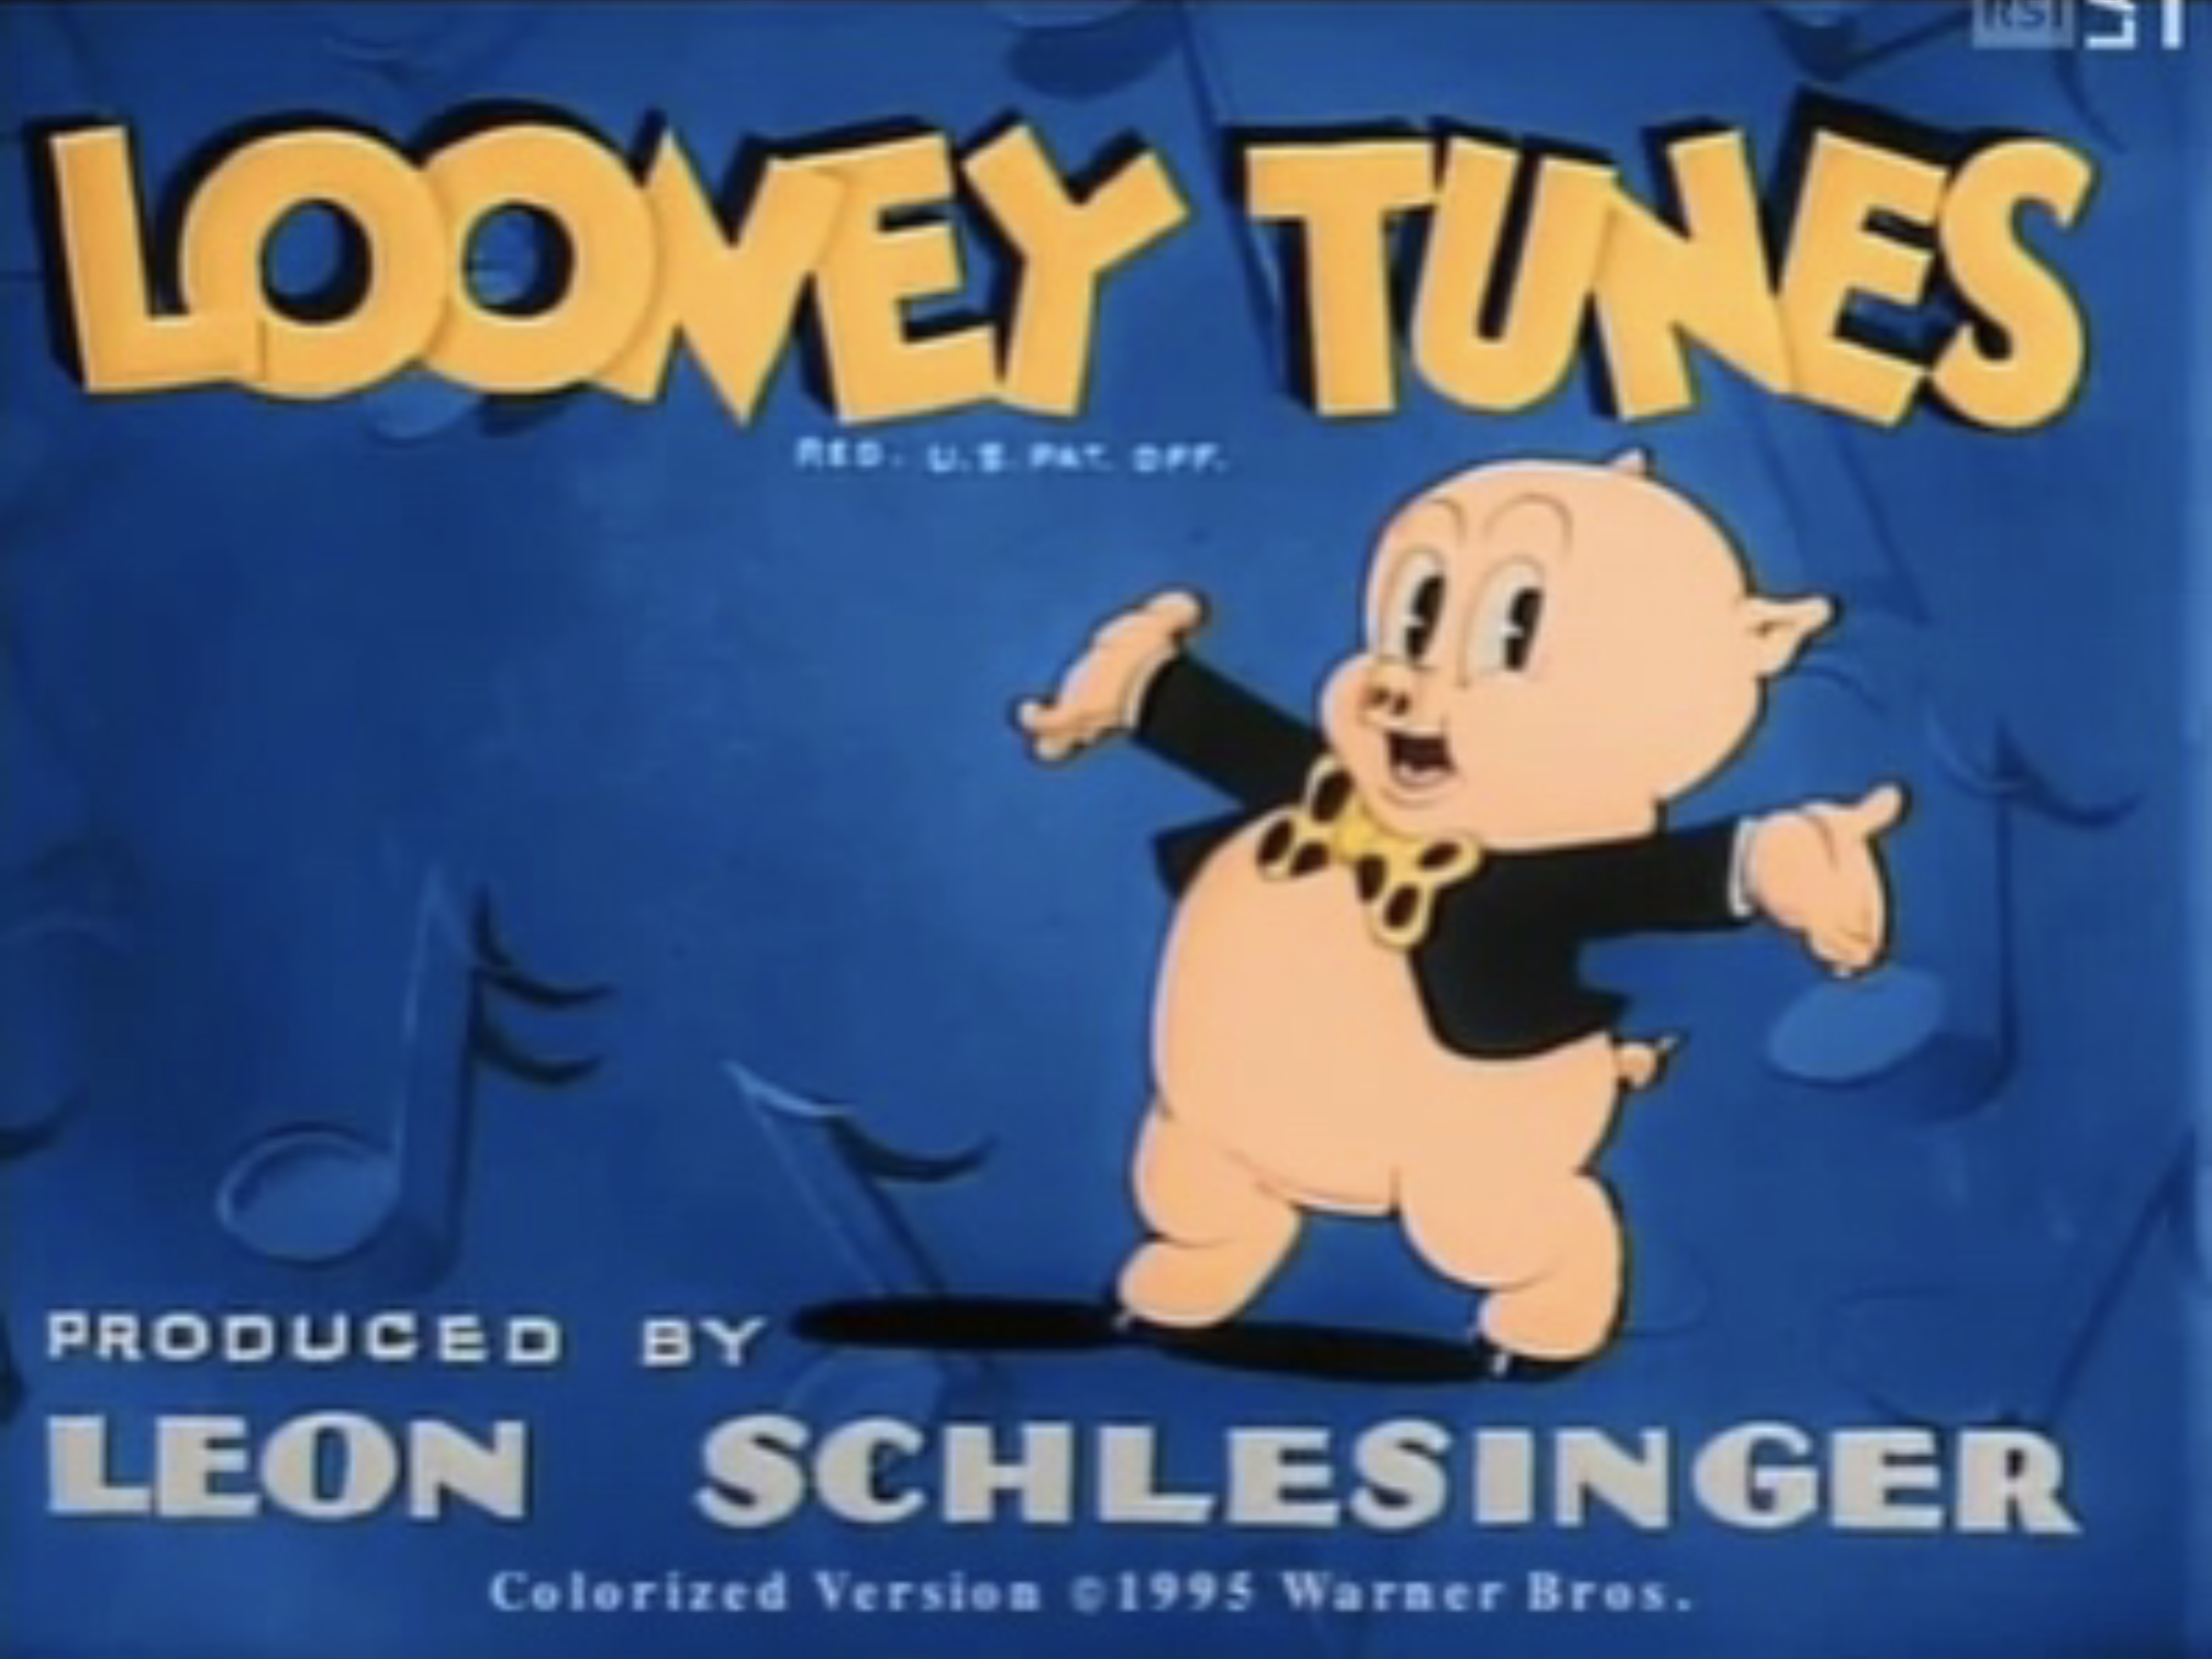 Injun Trouble (1938; computer colorized version) - Looney Tunes (partially lost computer colorized versions of shorts; 1990-1995)